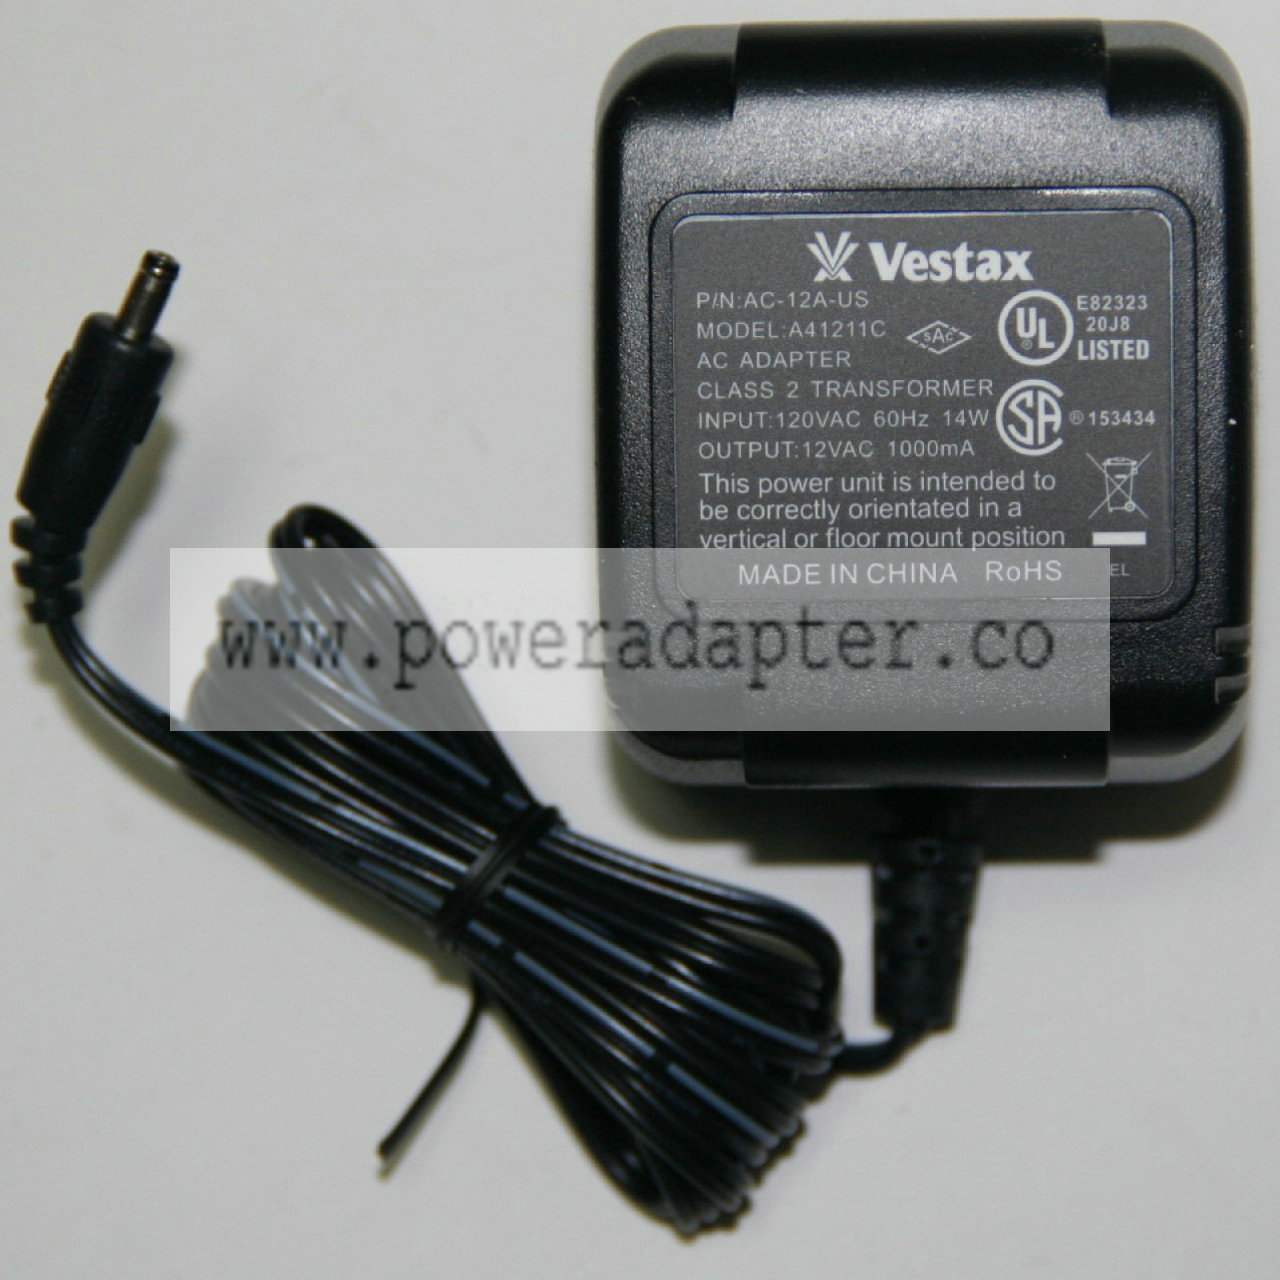 Generic replacement for Vestax AC-12A Power Adapter for many mixers etc Product Description This is an aftermarket repl